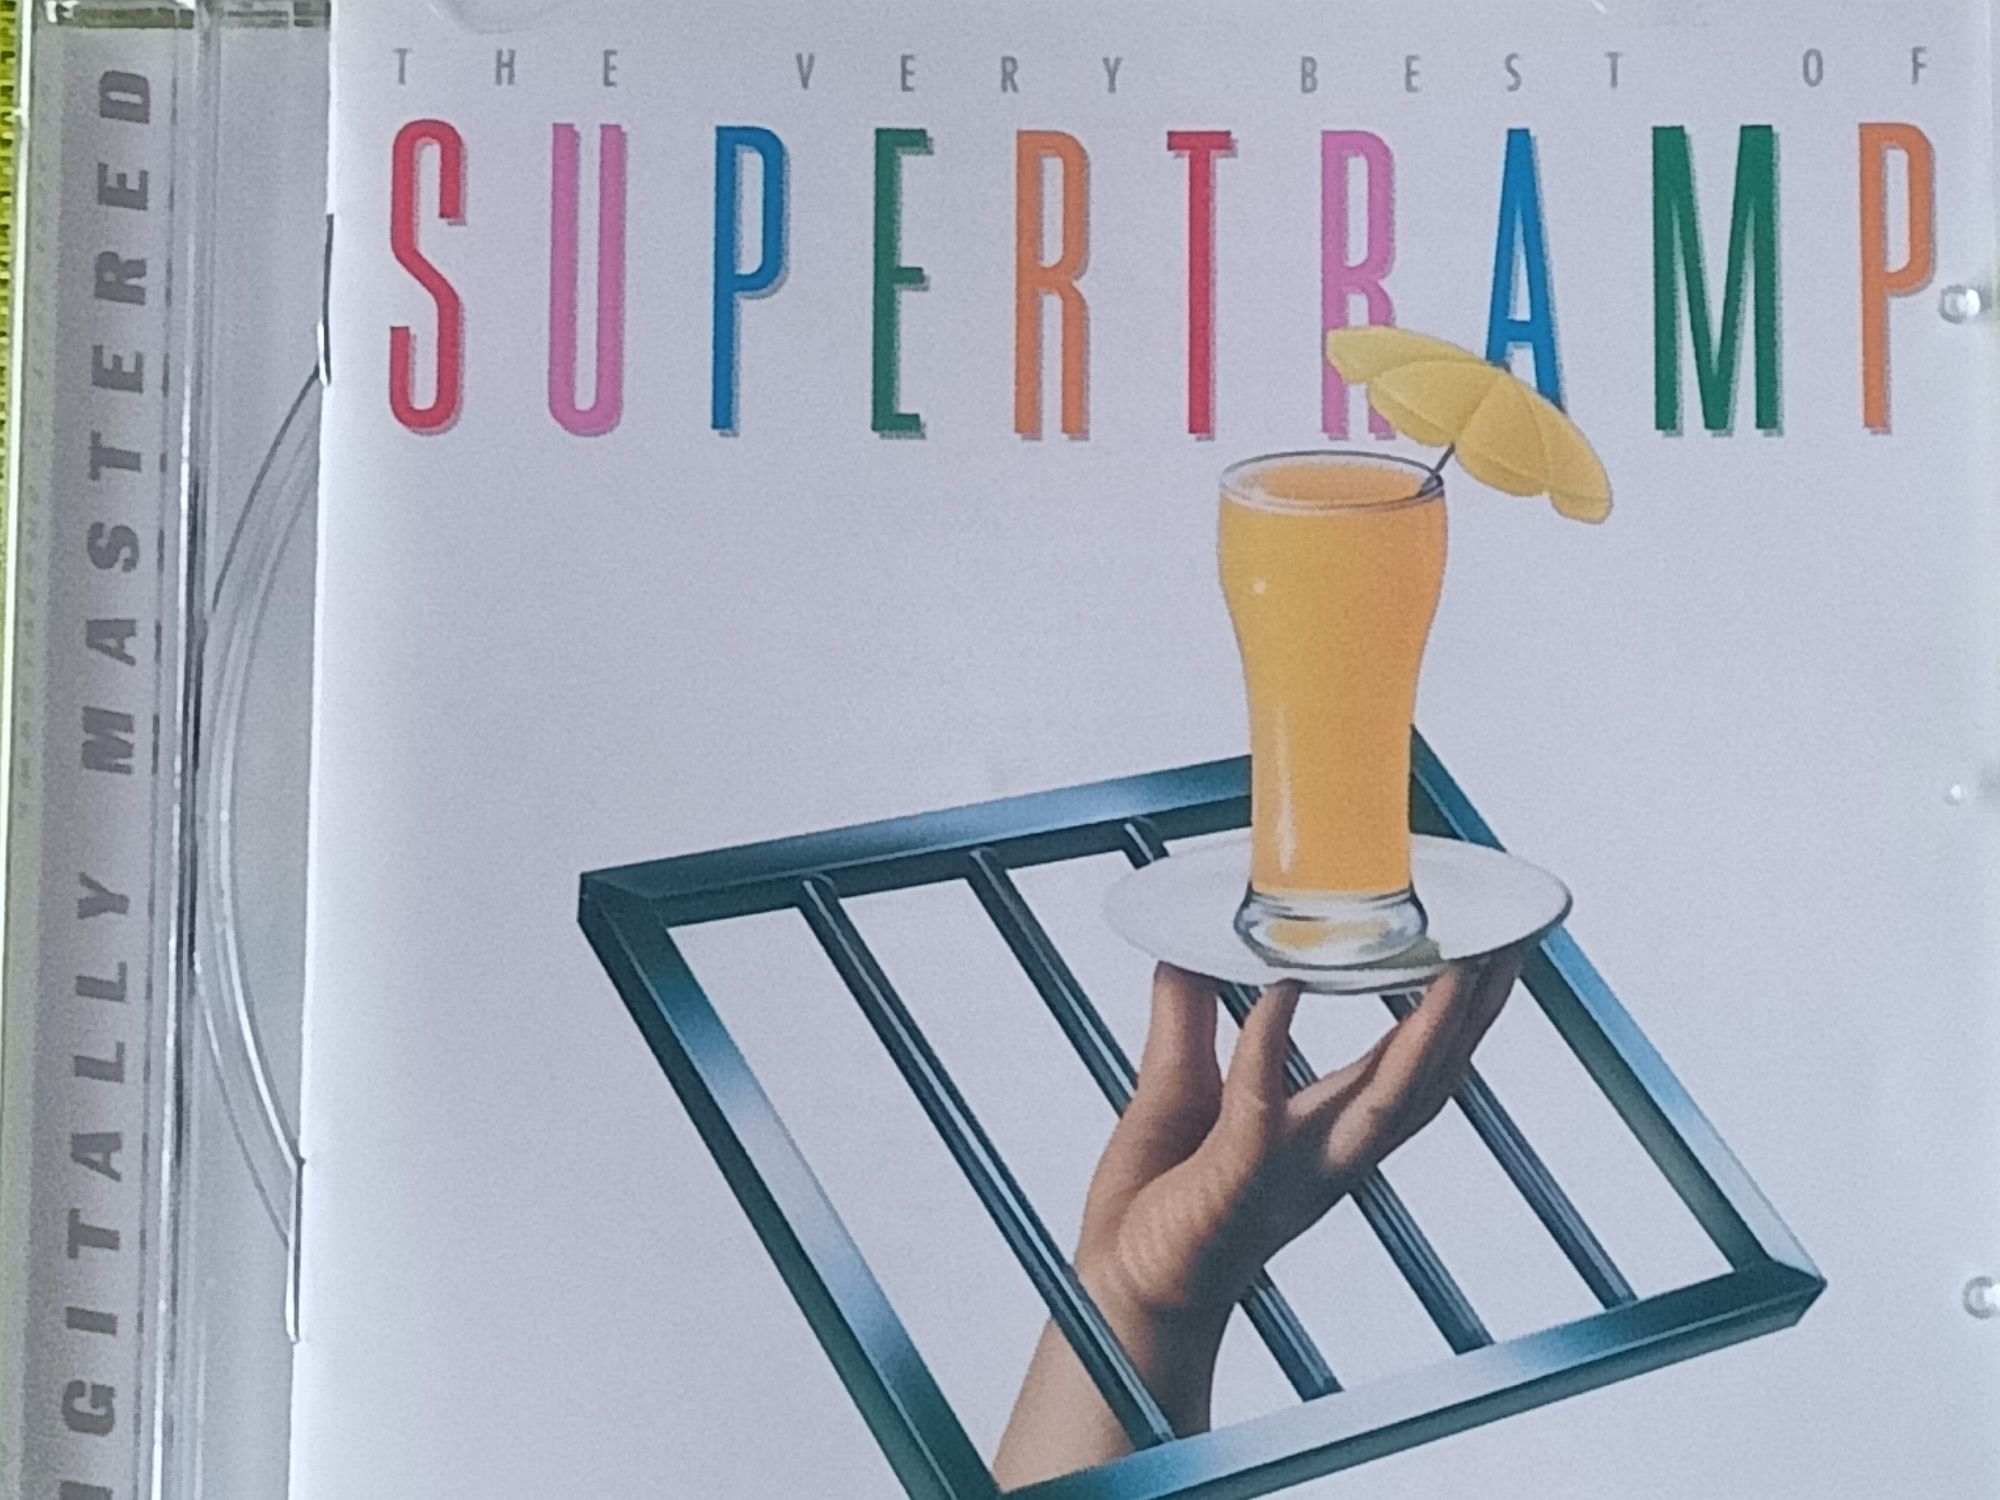 Supertramp - The Very Best Of - cd